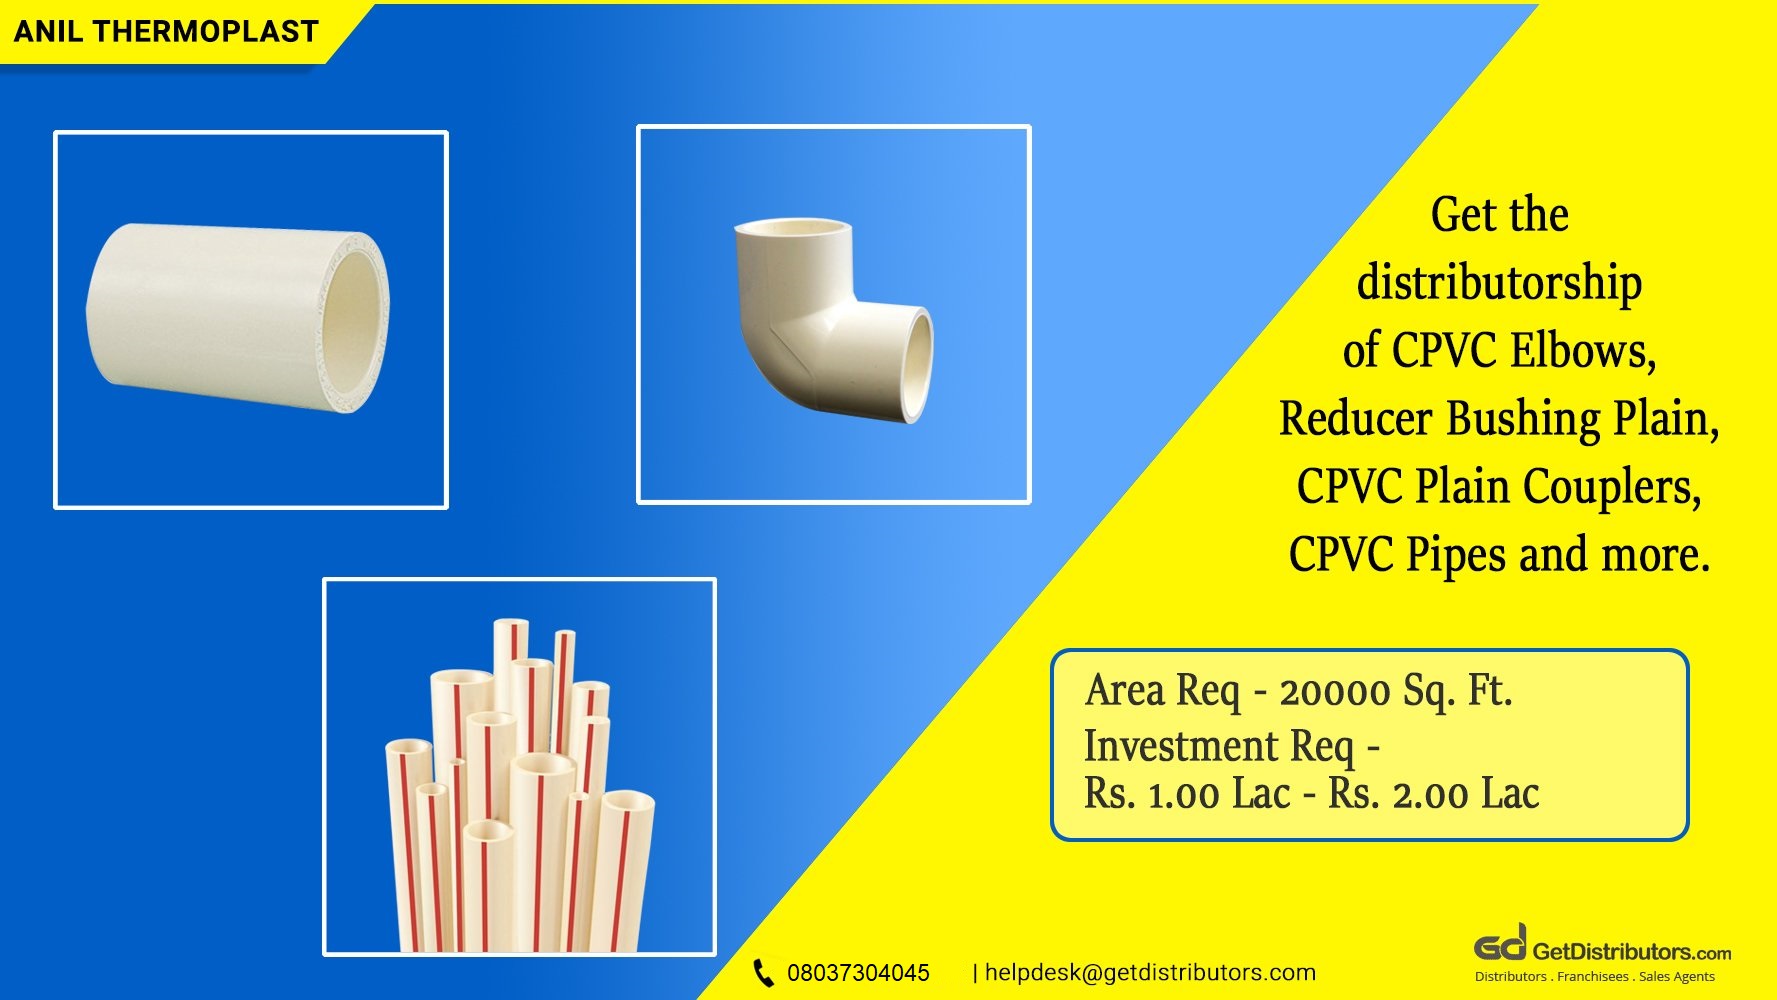 Offering sturdy CPVC pipes and fittings at a reasonable rate